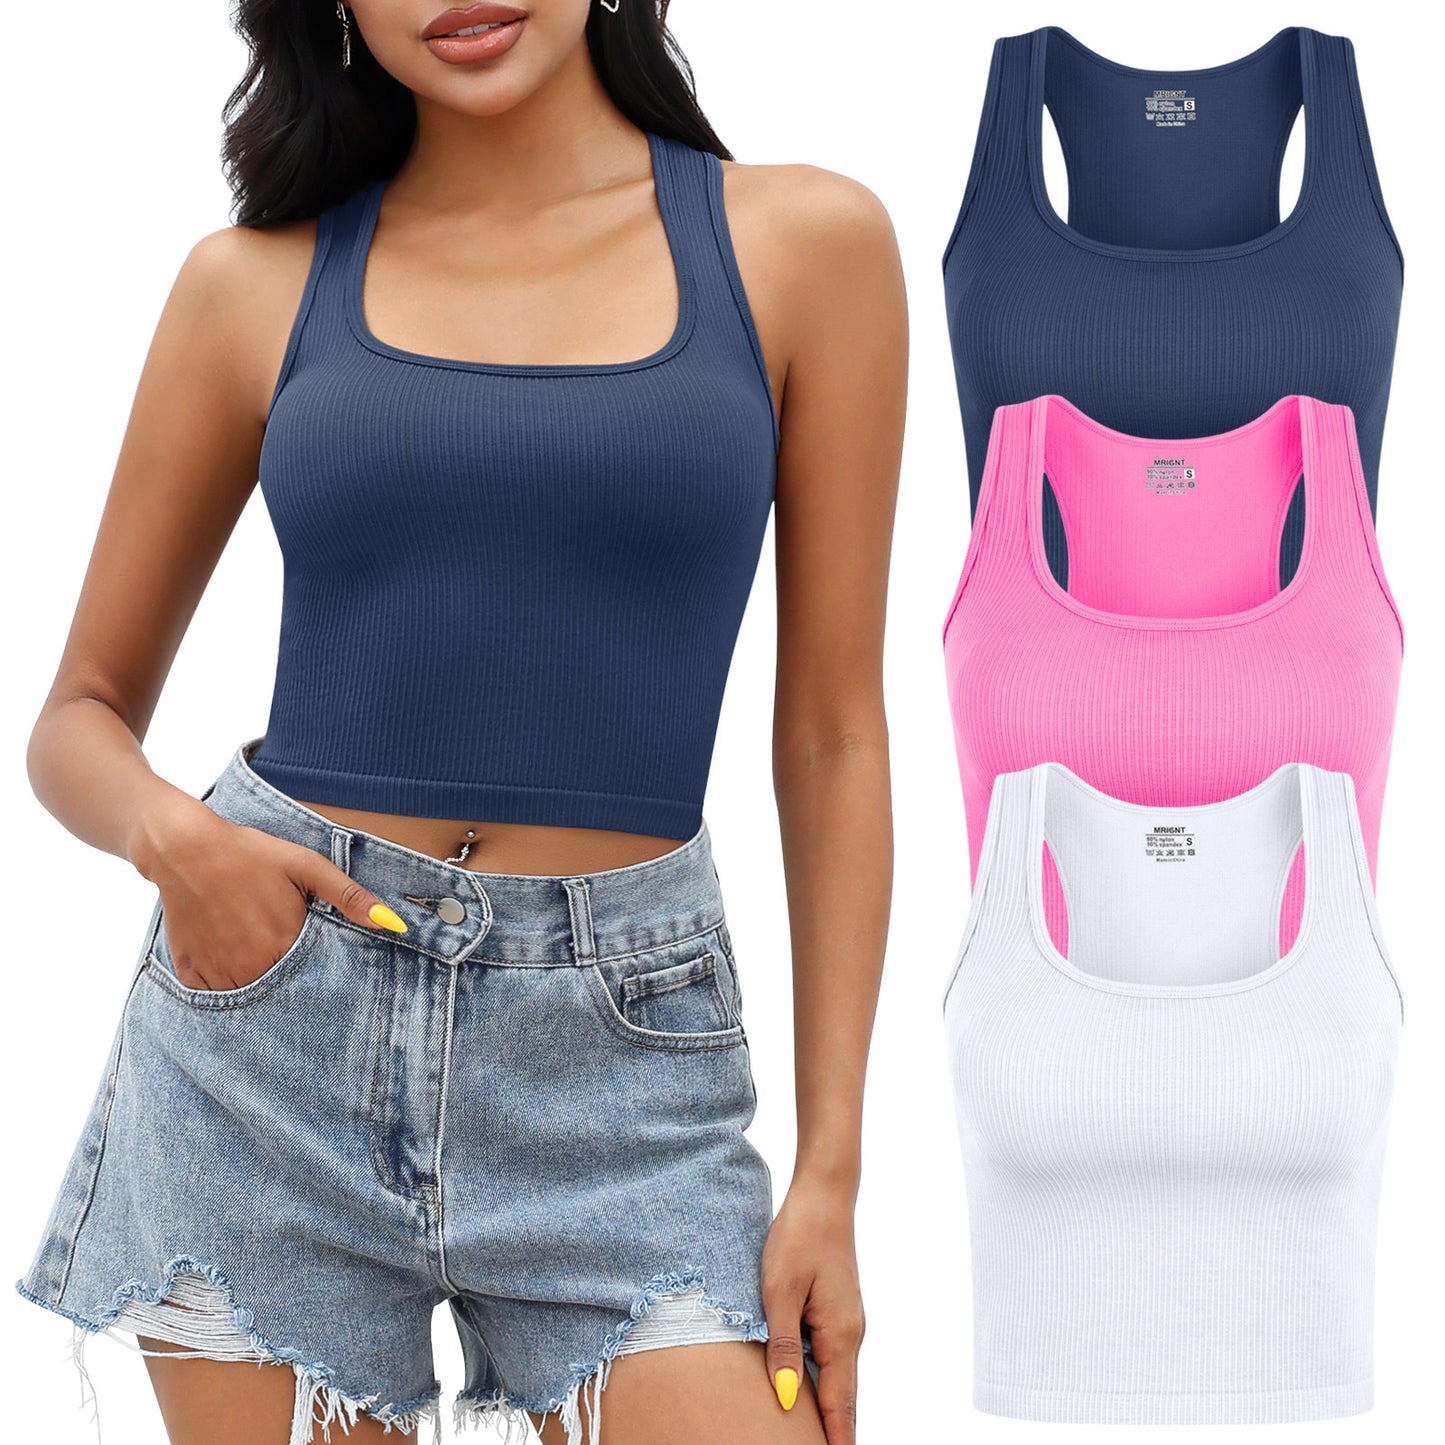 Tank Top for Women, 3 Pack Ribbed Seamless Racerback Yoga Crop Tops for Workout Running Gym Sport, Sleeveless Exercise Shirt for Daily Wearing